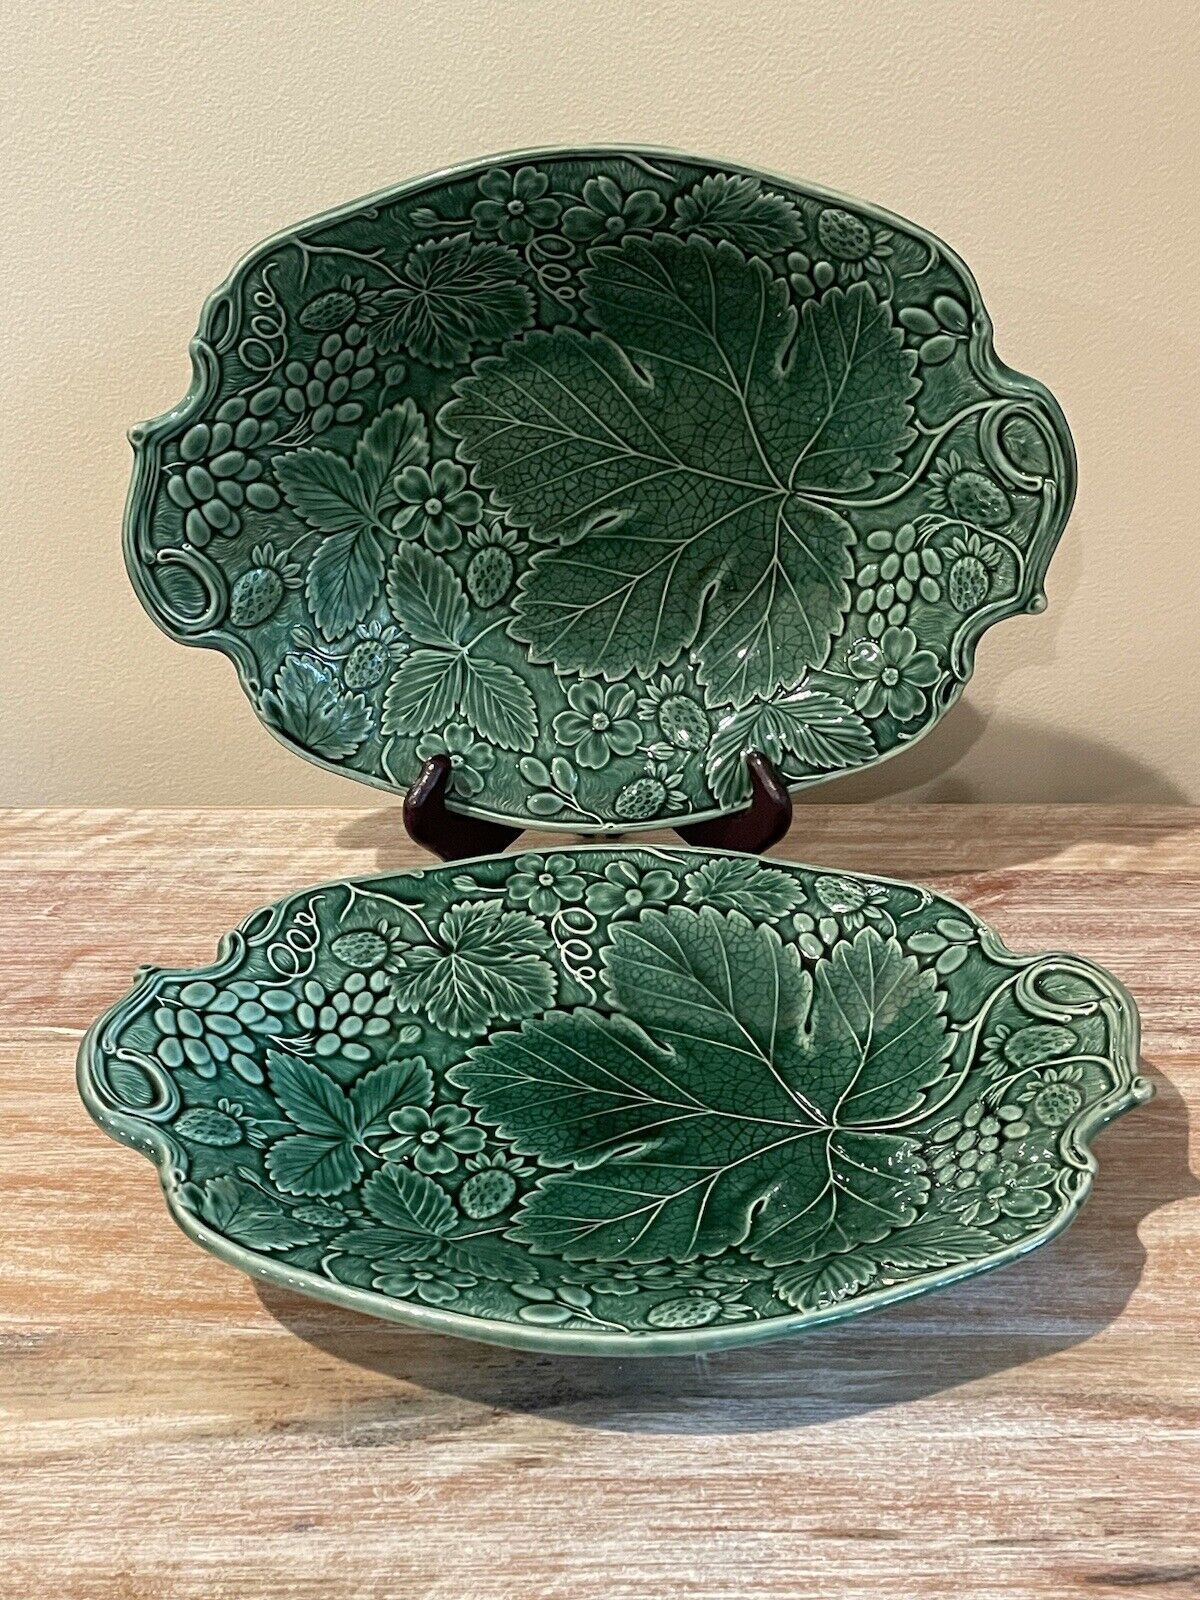  Pair of Antique 1800’s Green Majolica “Strawberry Leaf” Shallow Serving Bowls 